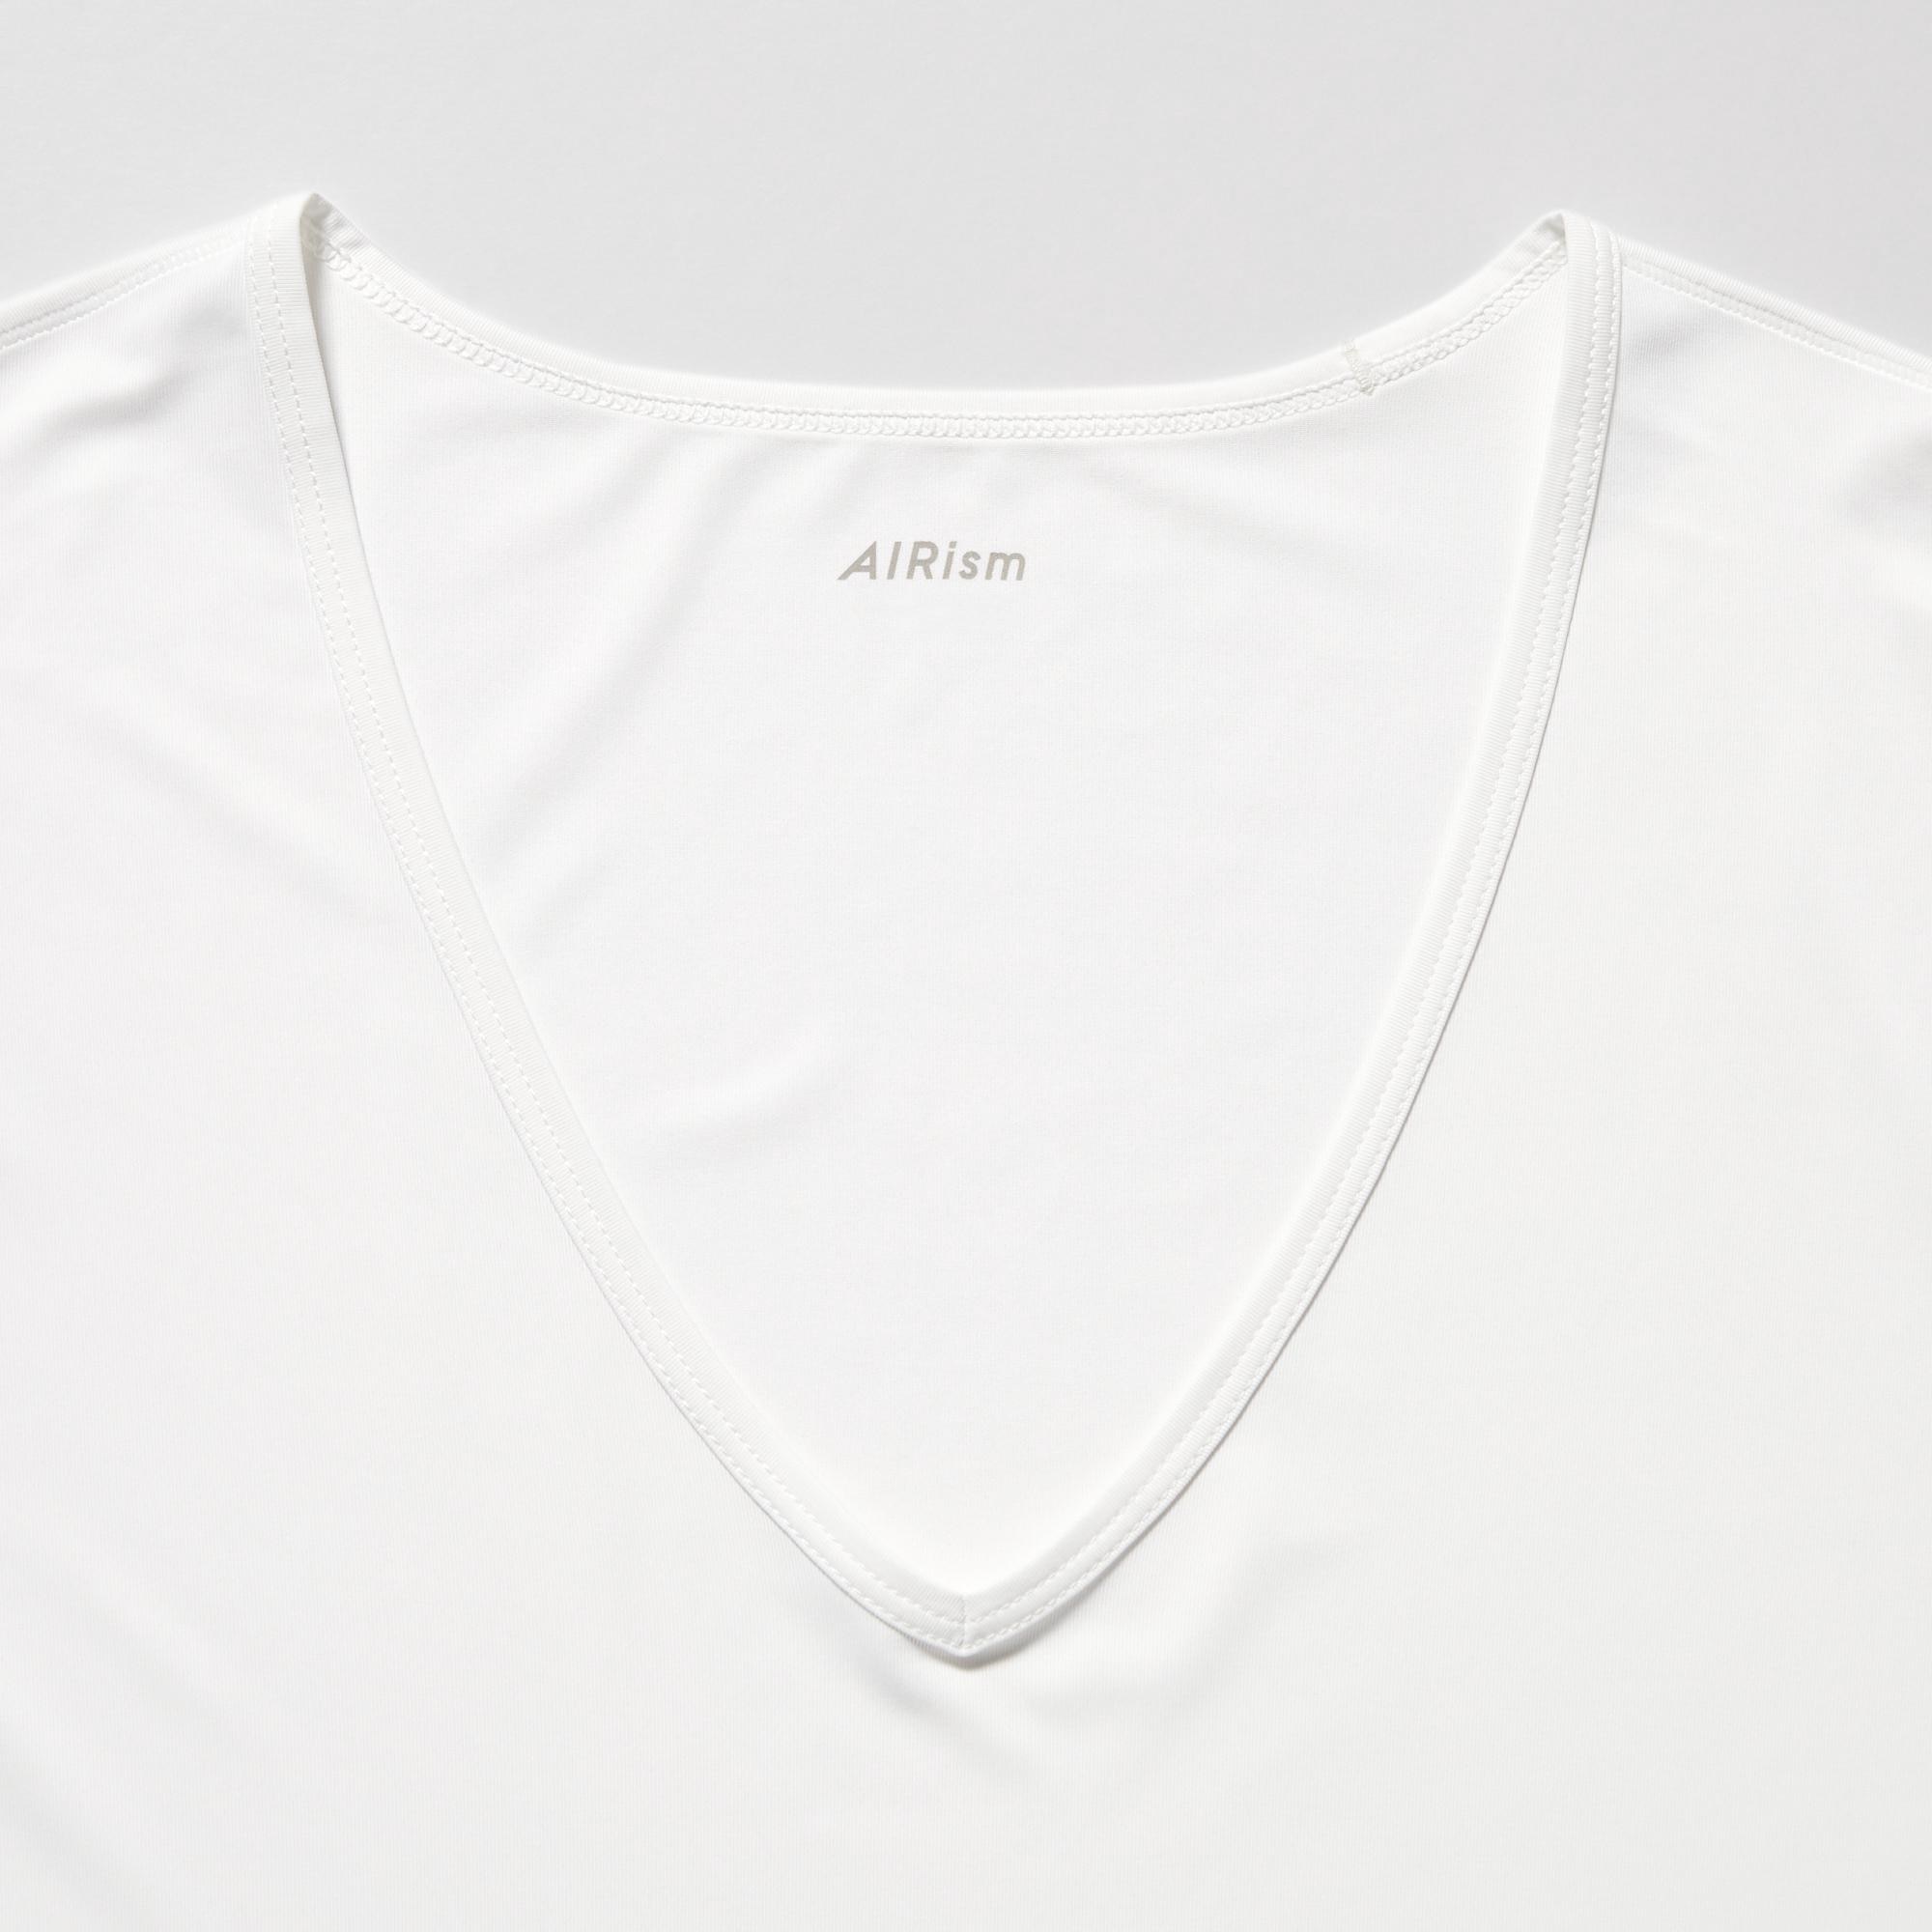 Uniqlo Canada - AIRism is more than just innerwear. It's comfort